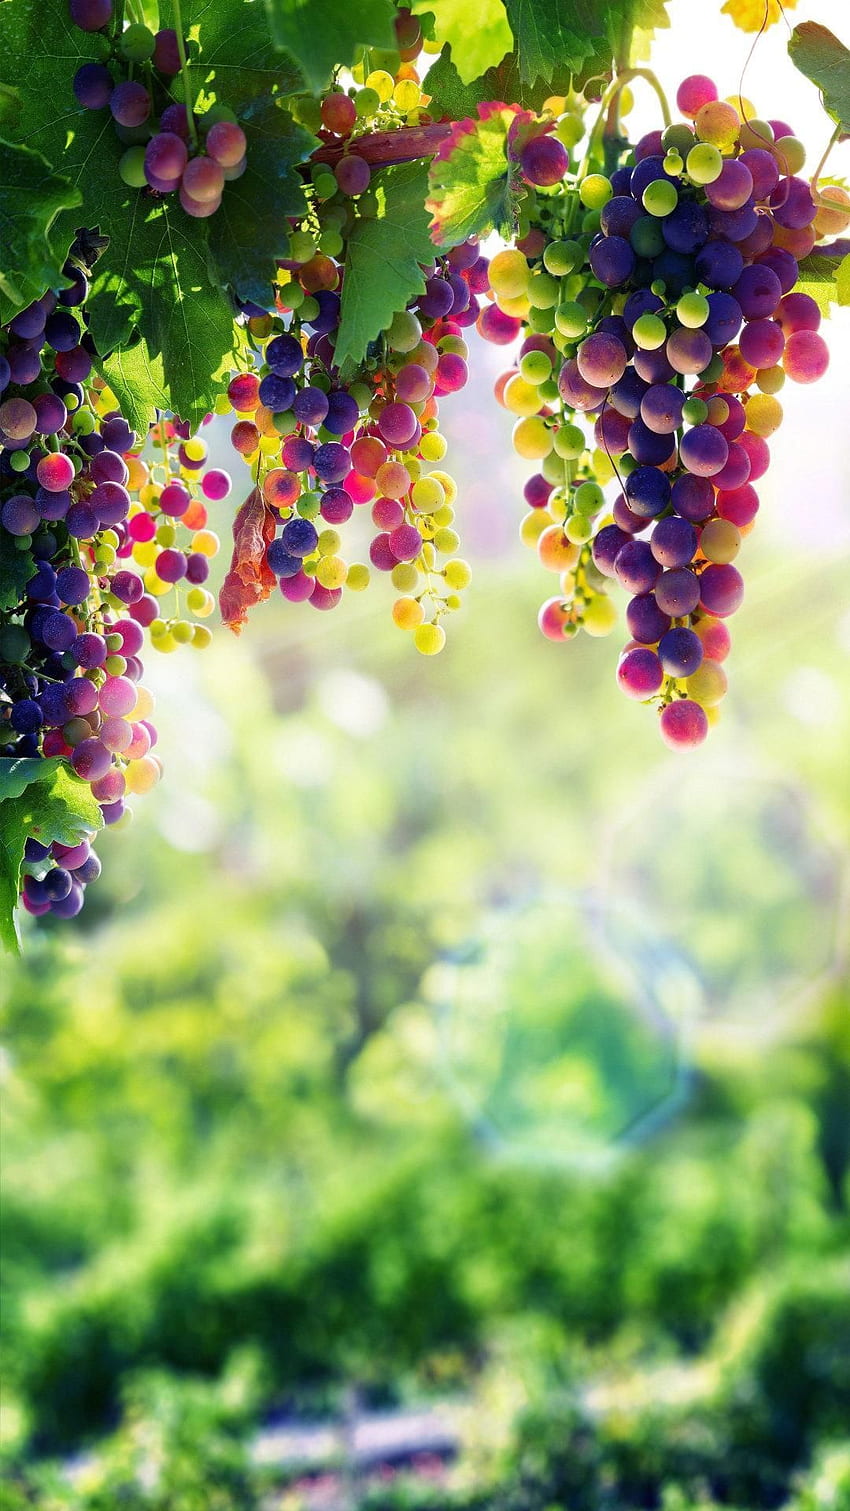 Grapes Photos Download The BEST Free Grapes Stock Photos  HD Images